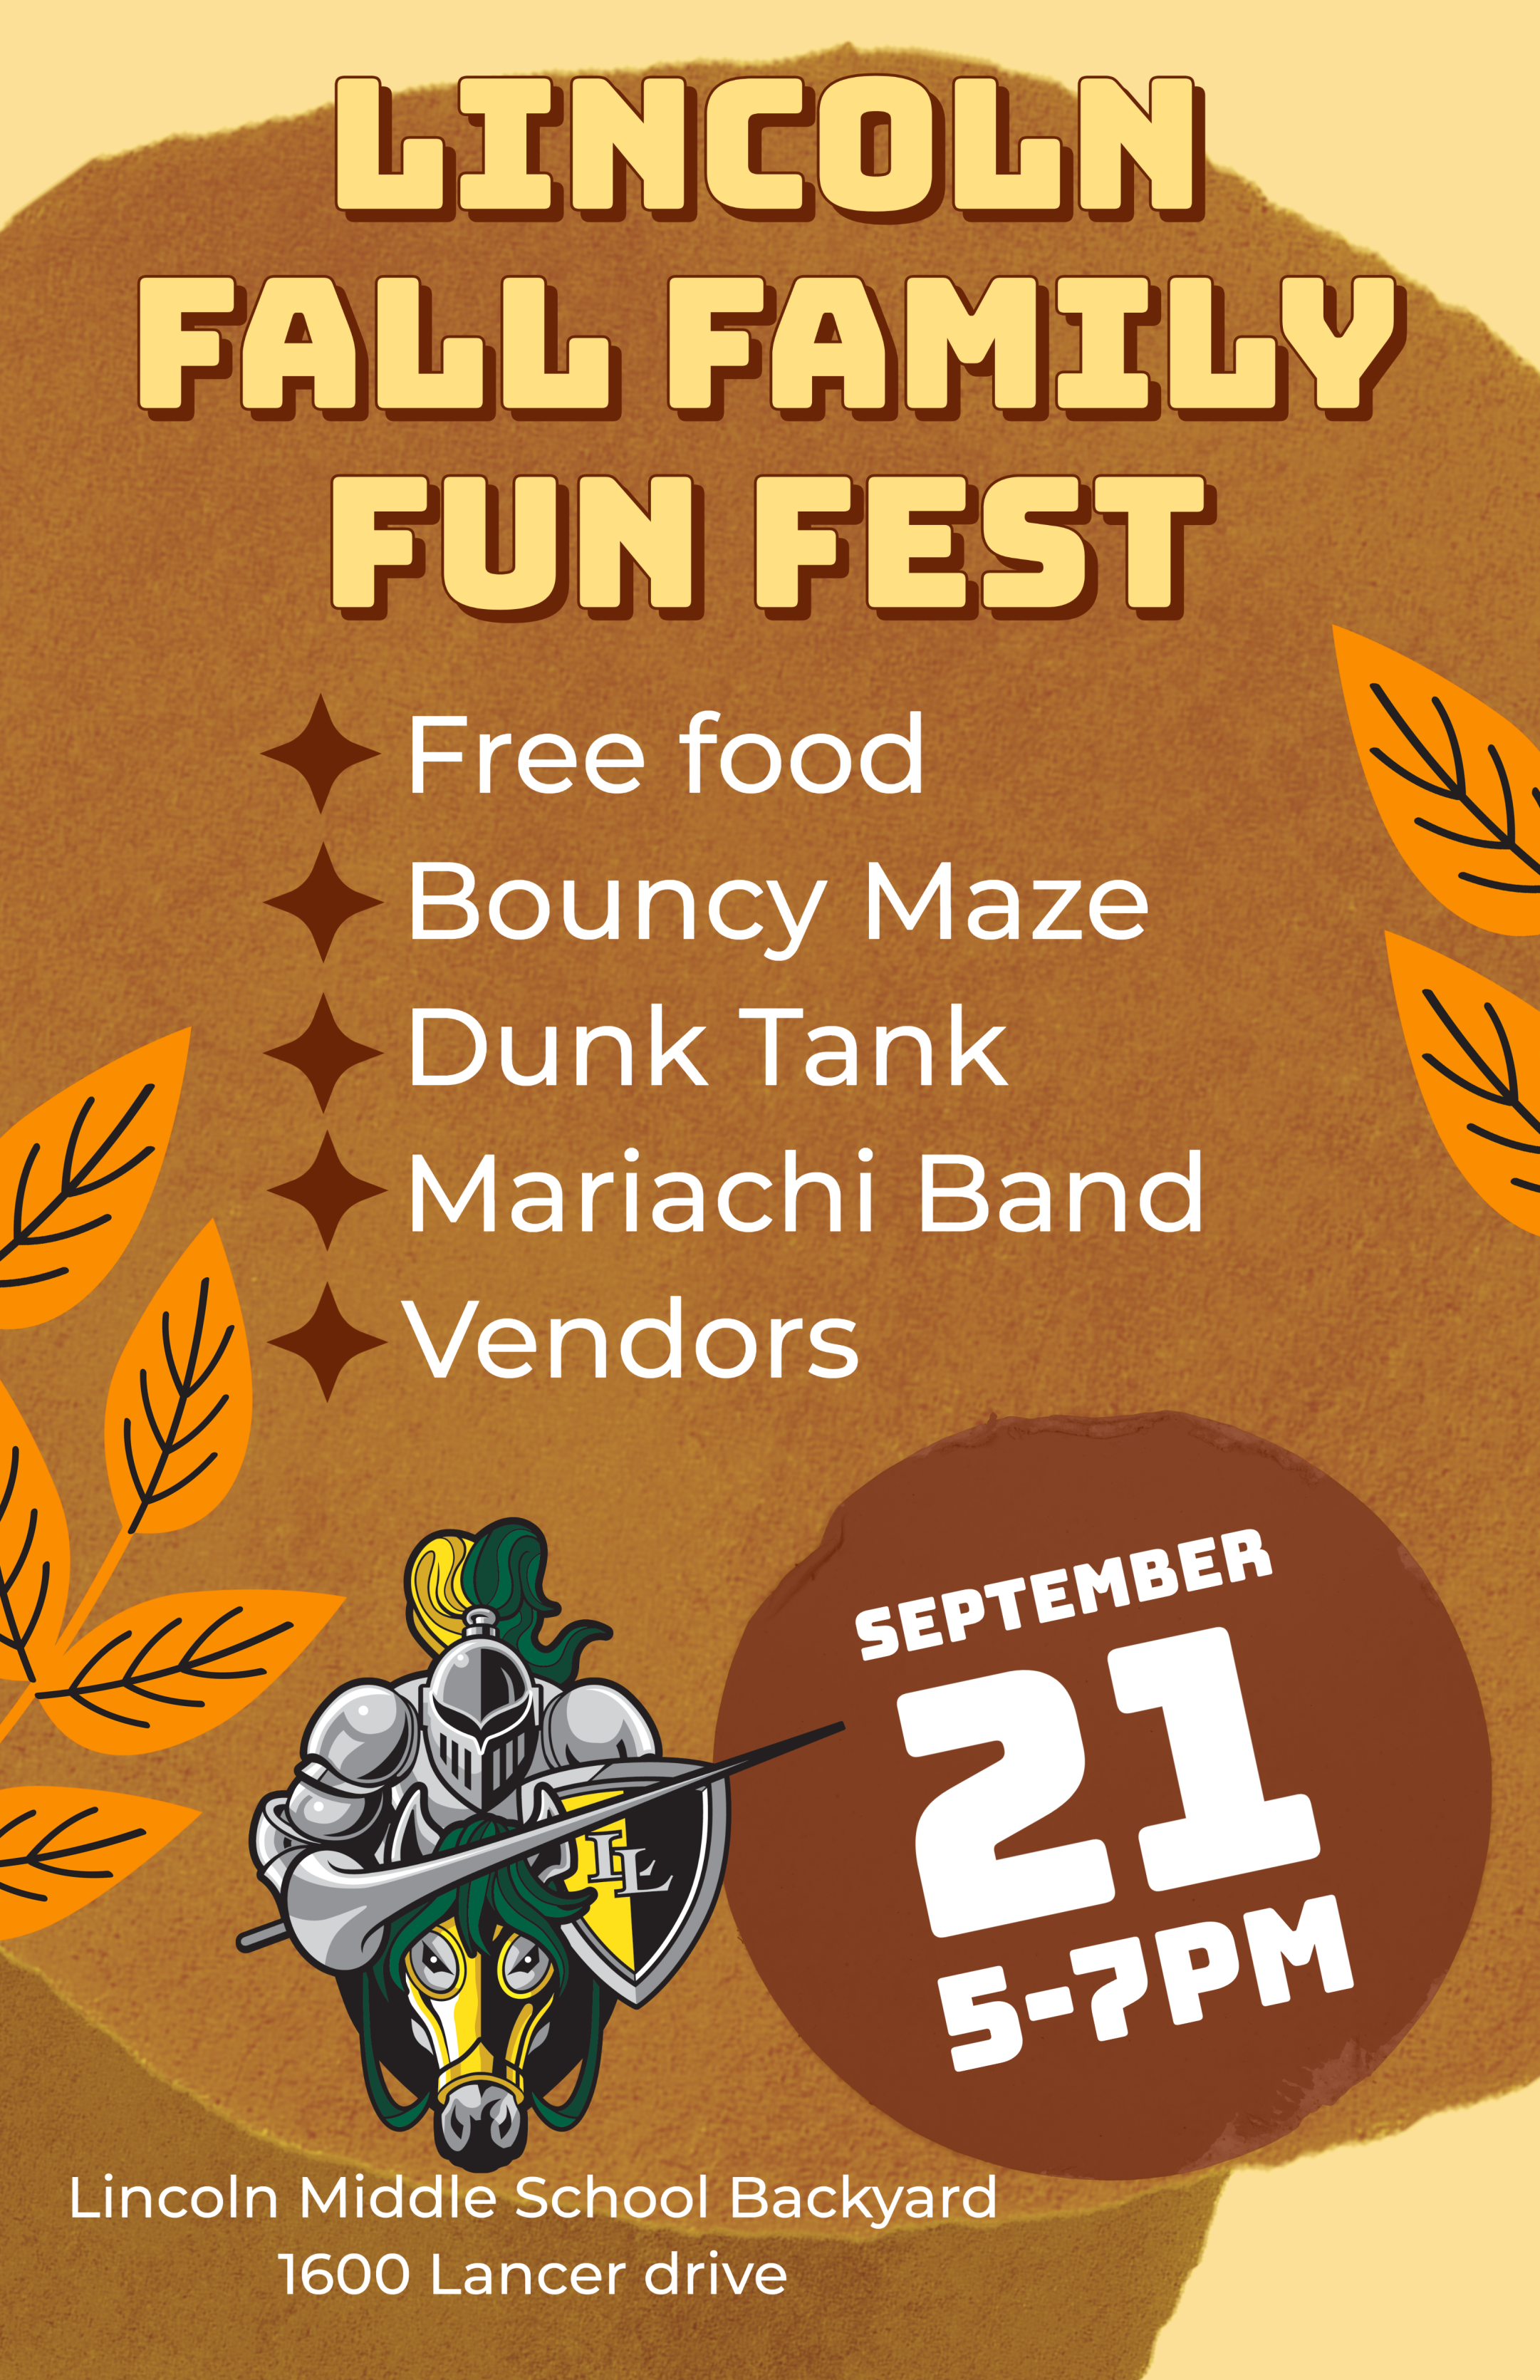 Lincoln Fall Family Fun Fest September 21 from 5-7pm. Food, Bouncy Maze, Dunk Tank, Mariachi Band, Vendors in the backyard of Lincoln Middle School